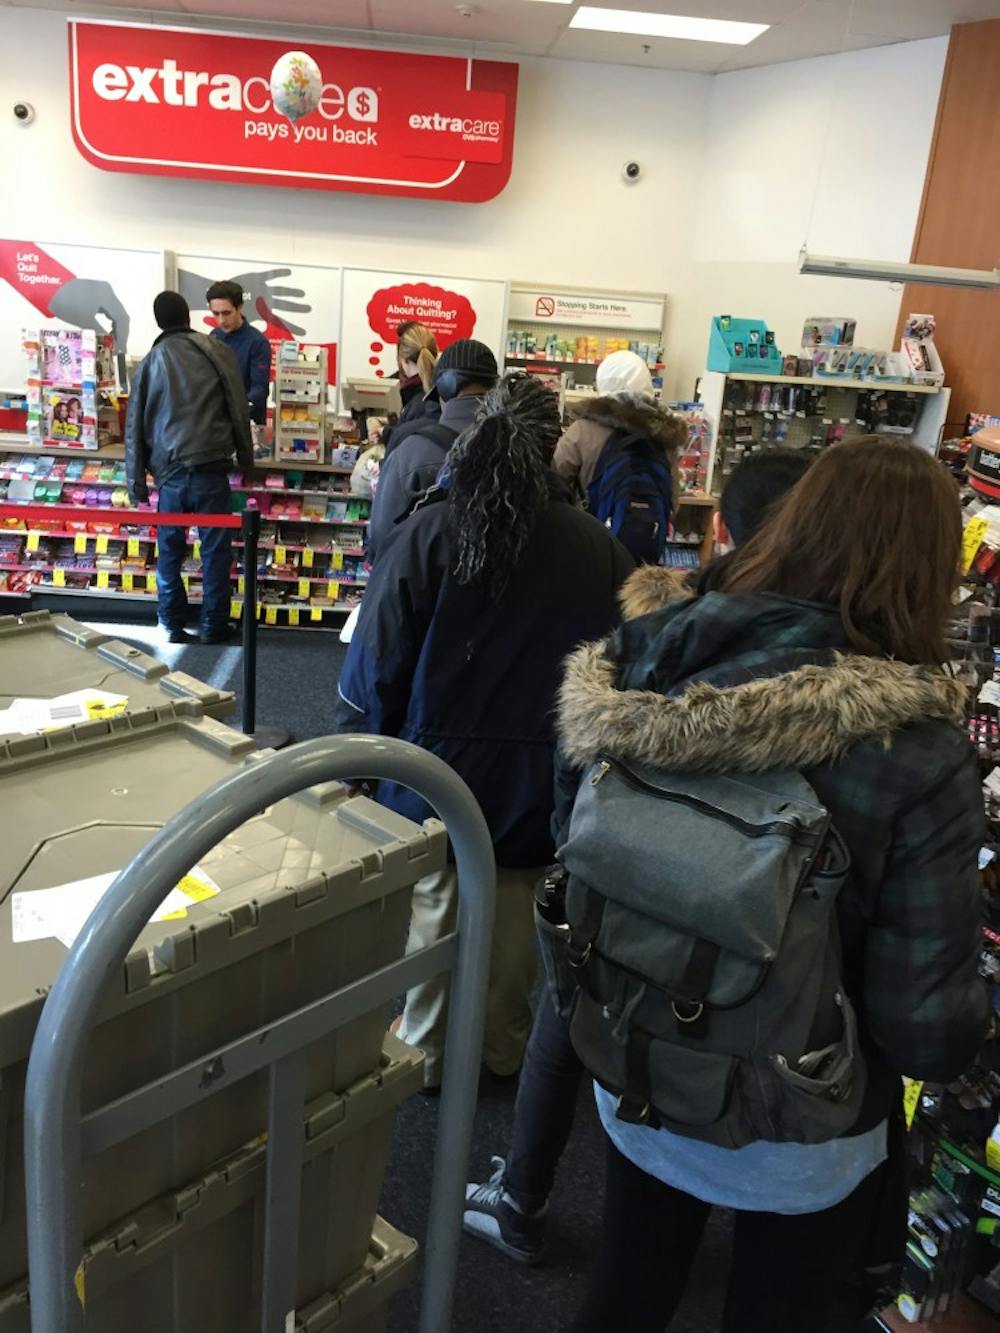 Shoppers returned to CVS following the outage.